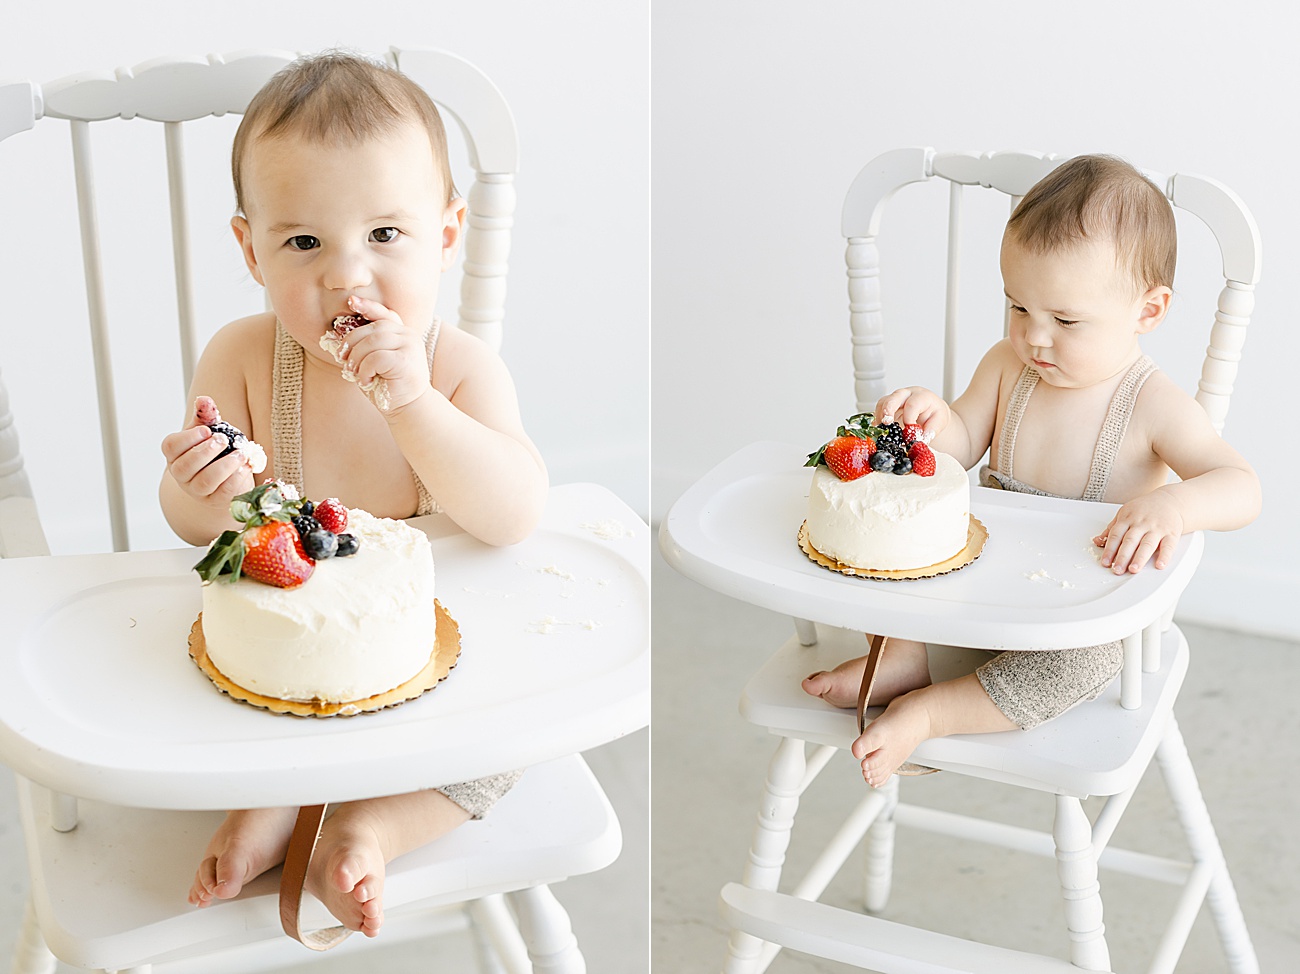 Little boy eating fruit from top of his cake smash cake. Photo by Sana Ahmed Photography.